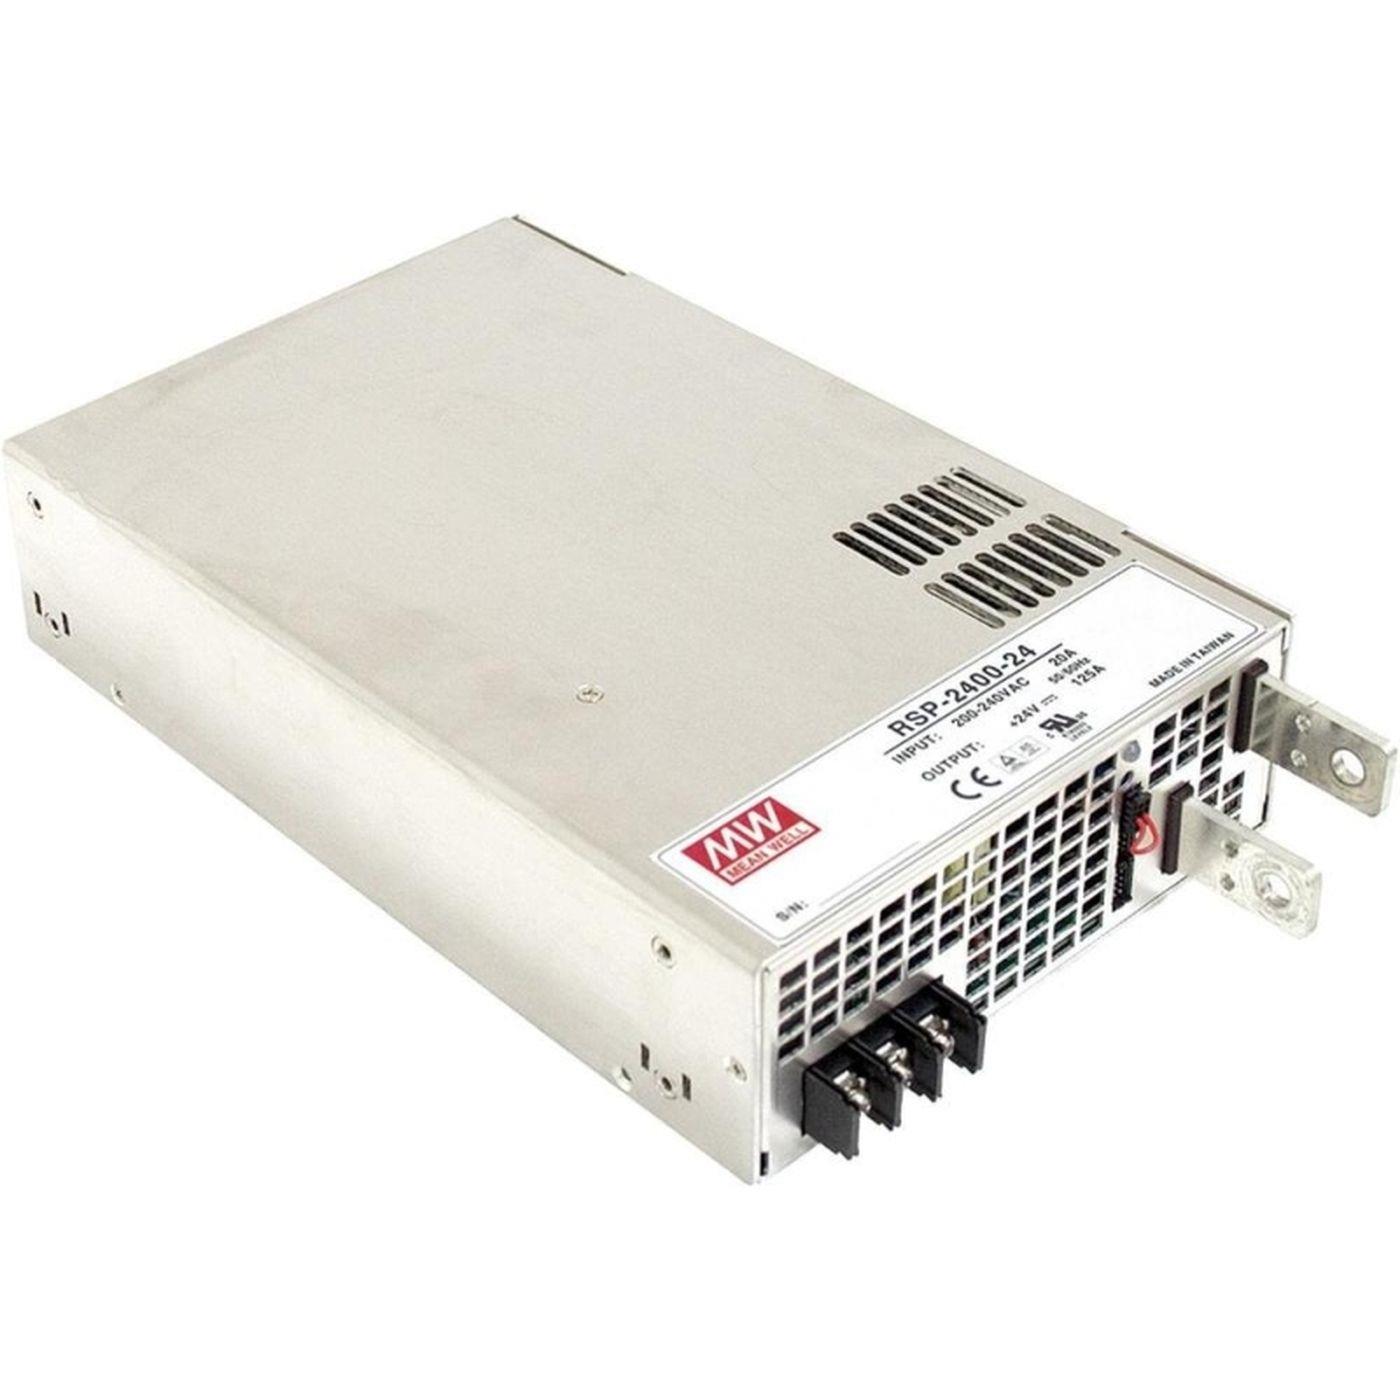 RSP-3000-24 3000W 24V 125A Industrial power supply